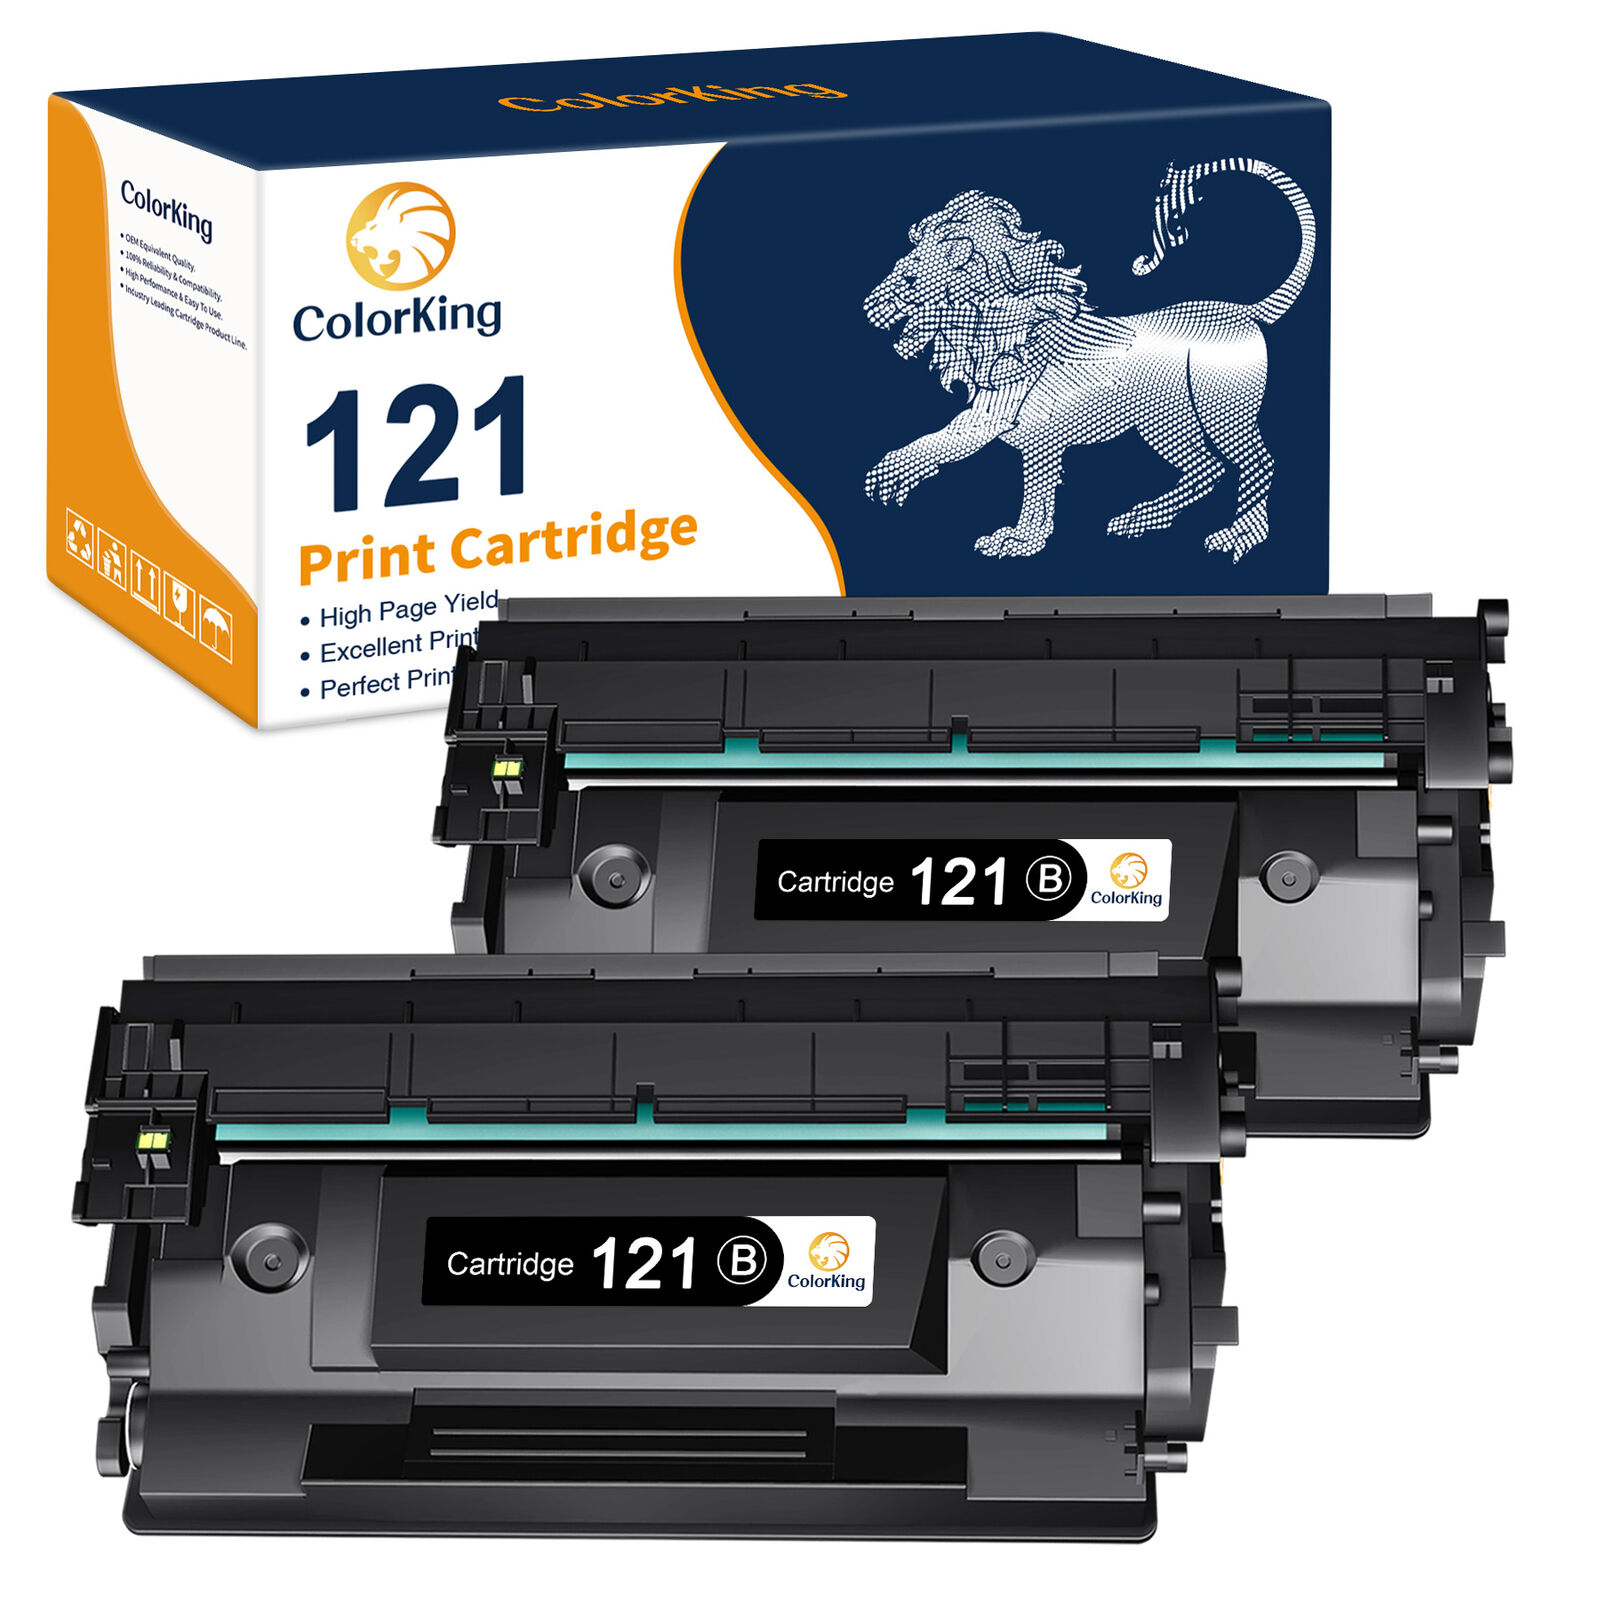 2Pack 121 Toner Cartridge replacement for Canon 121 Image CLASS D1650 3252C001